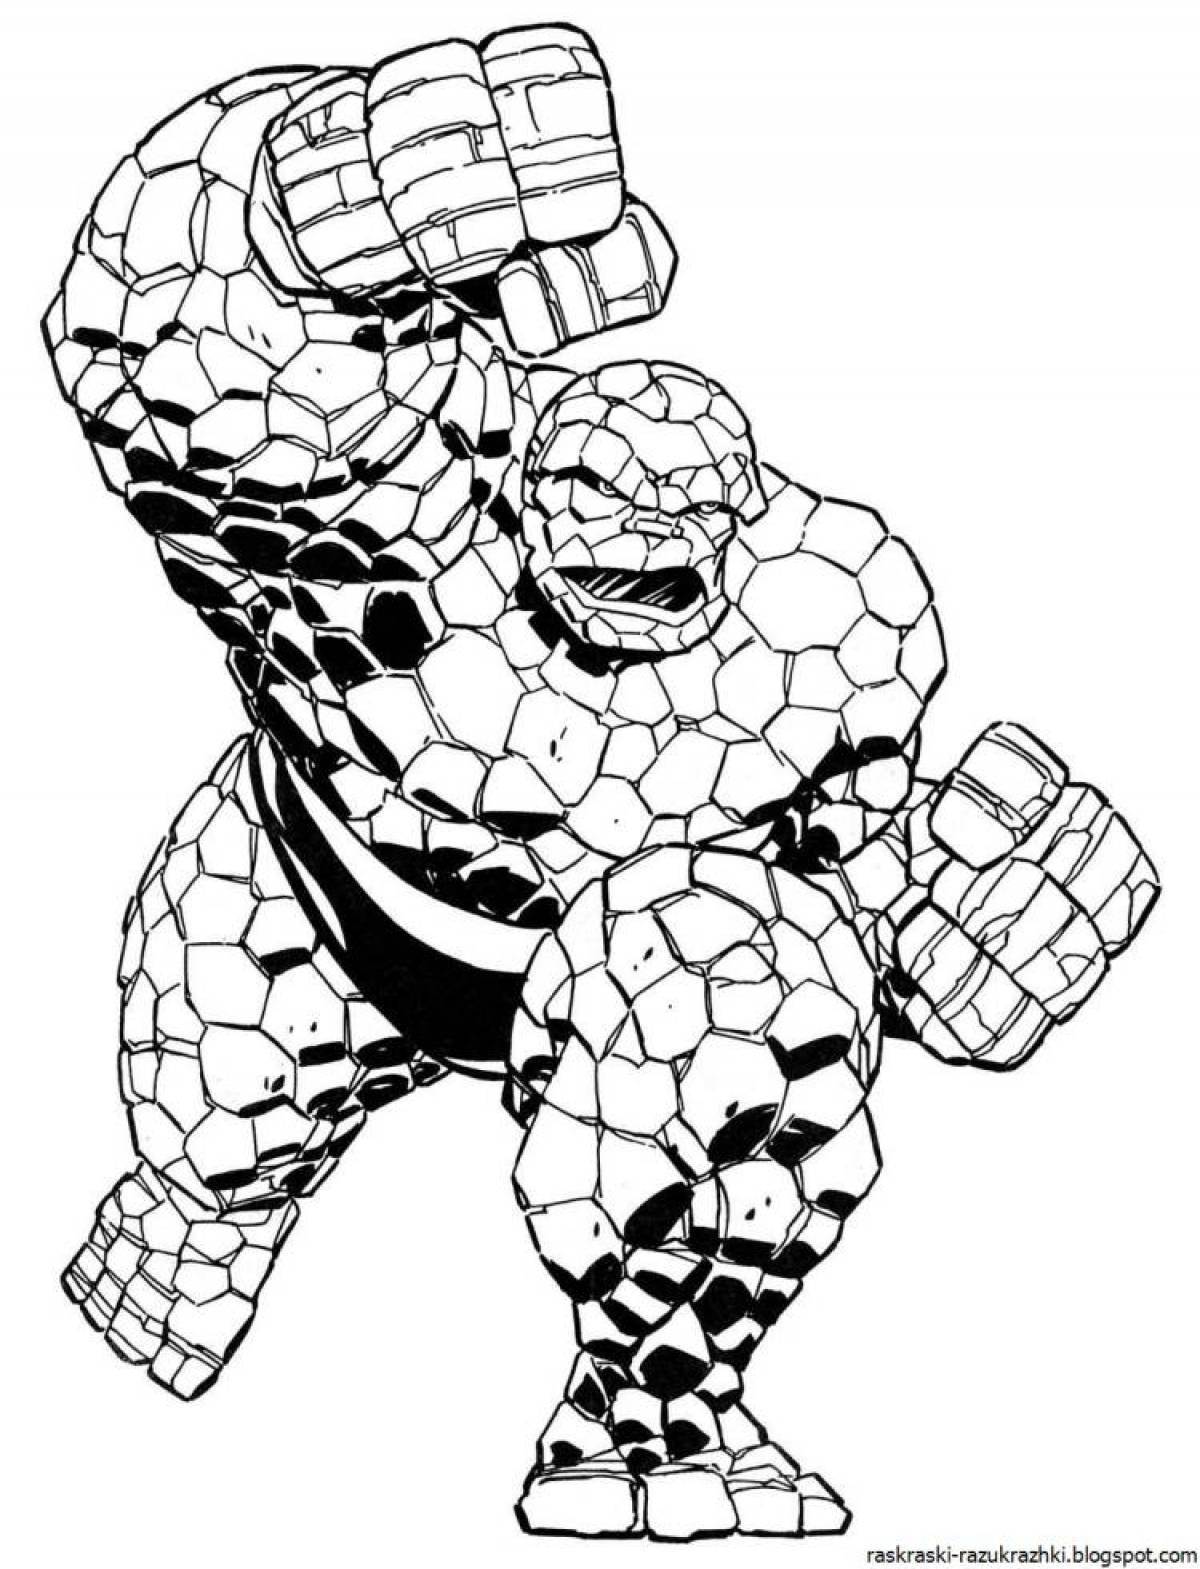 Fascinating superhero coloring pages for boys